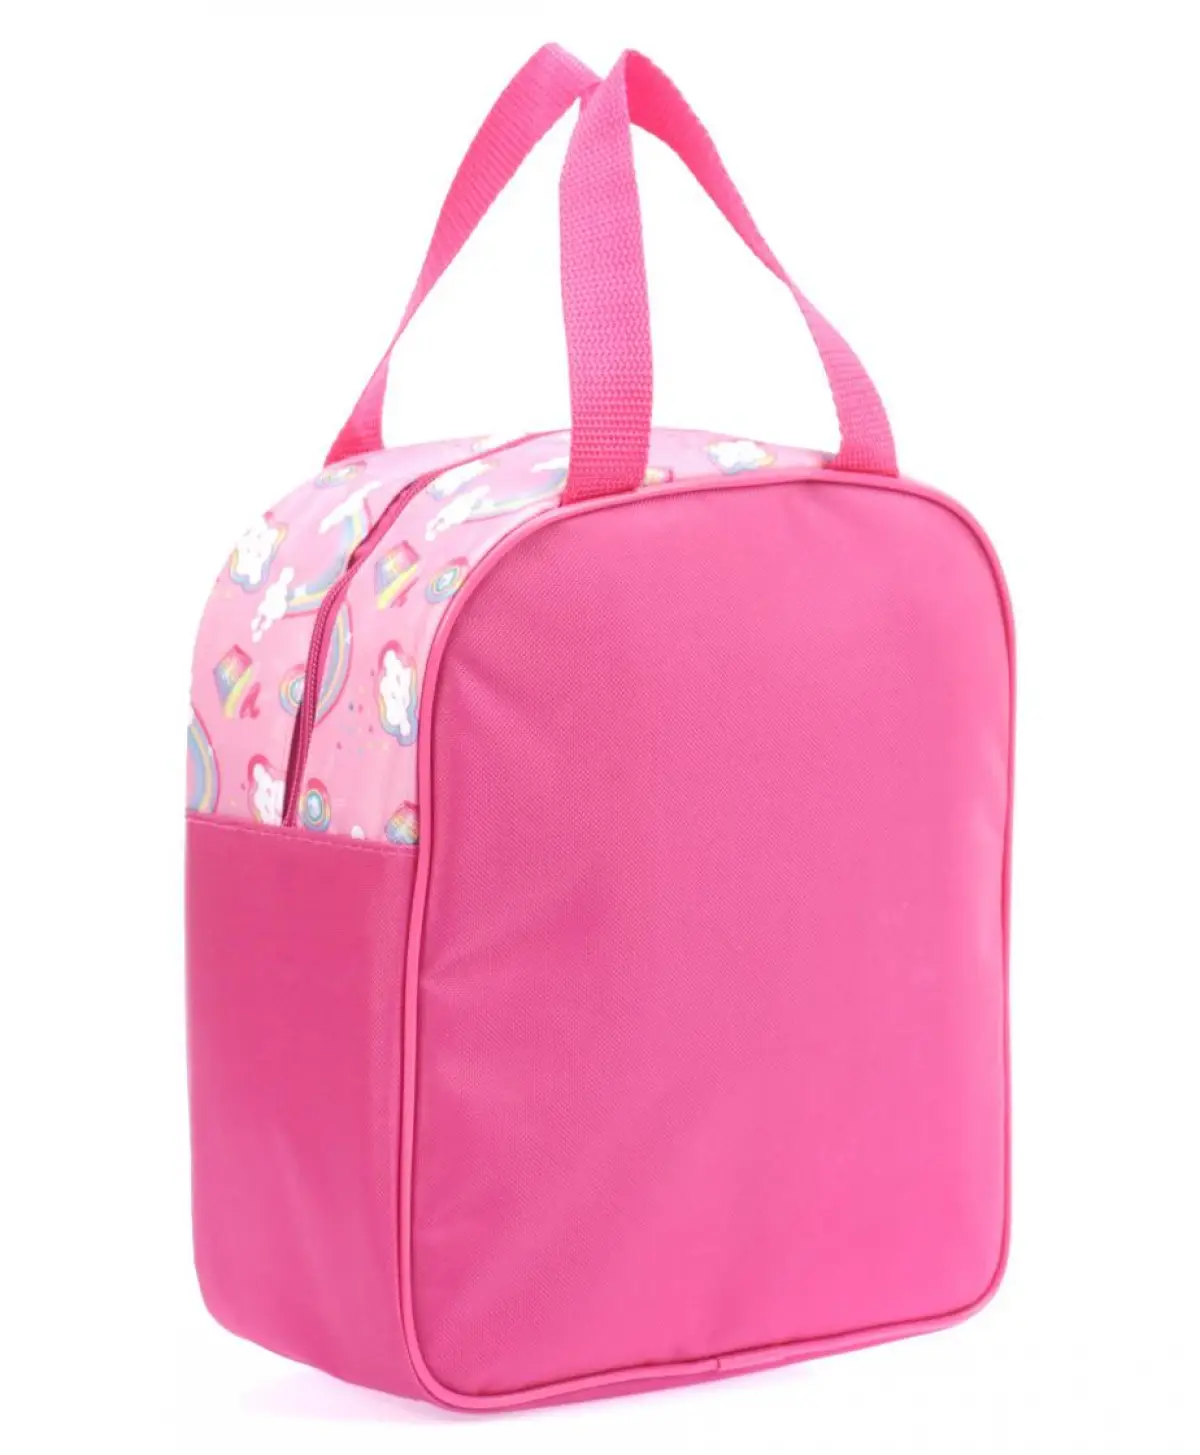 Striders Barbie Lunch Bag  Stylish, Insulated Tote for Kids with Trendy Design